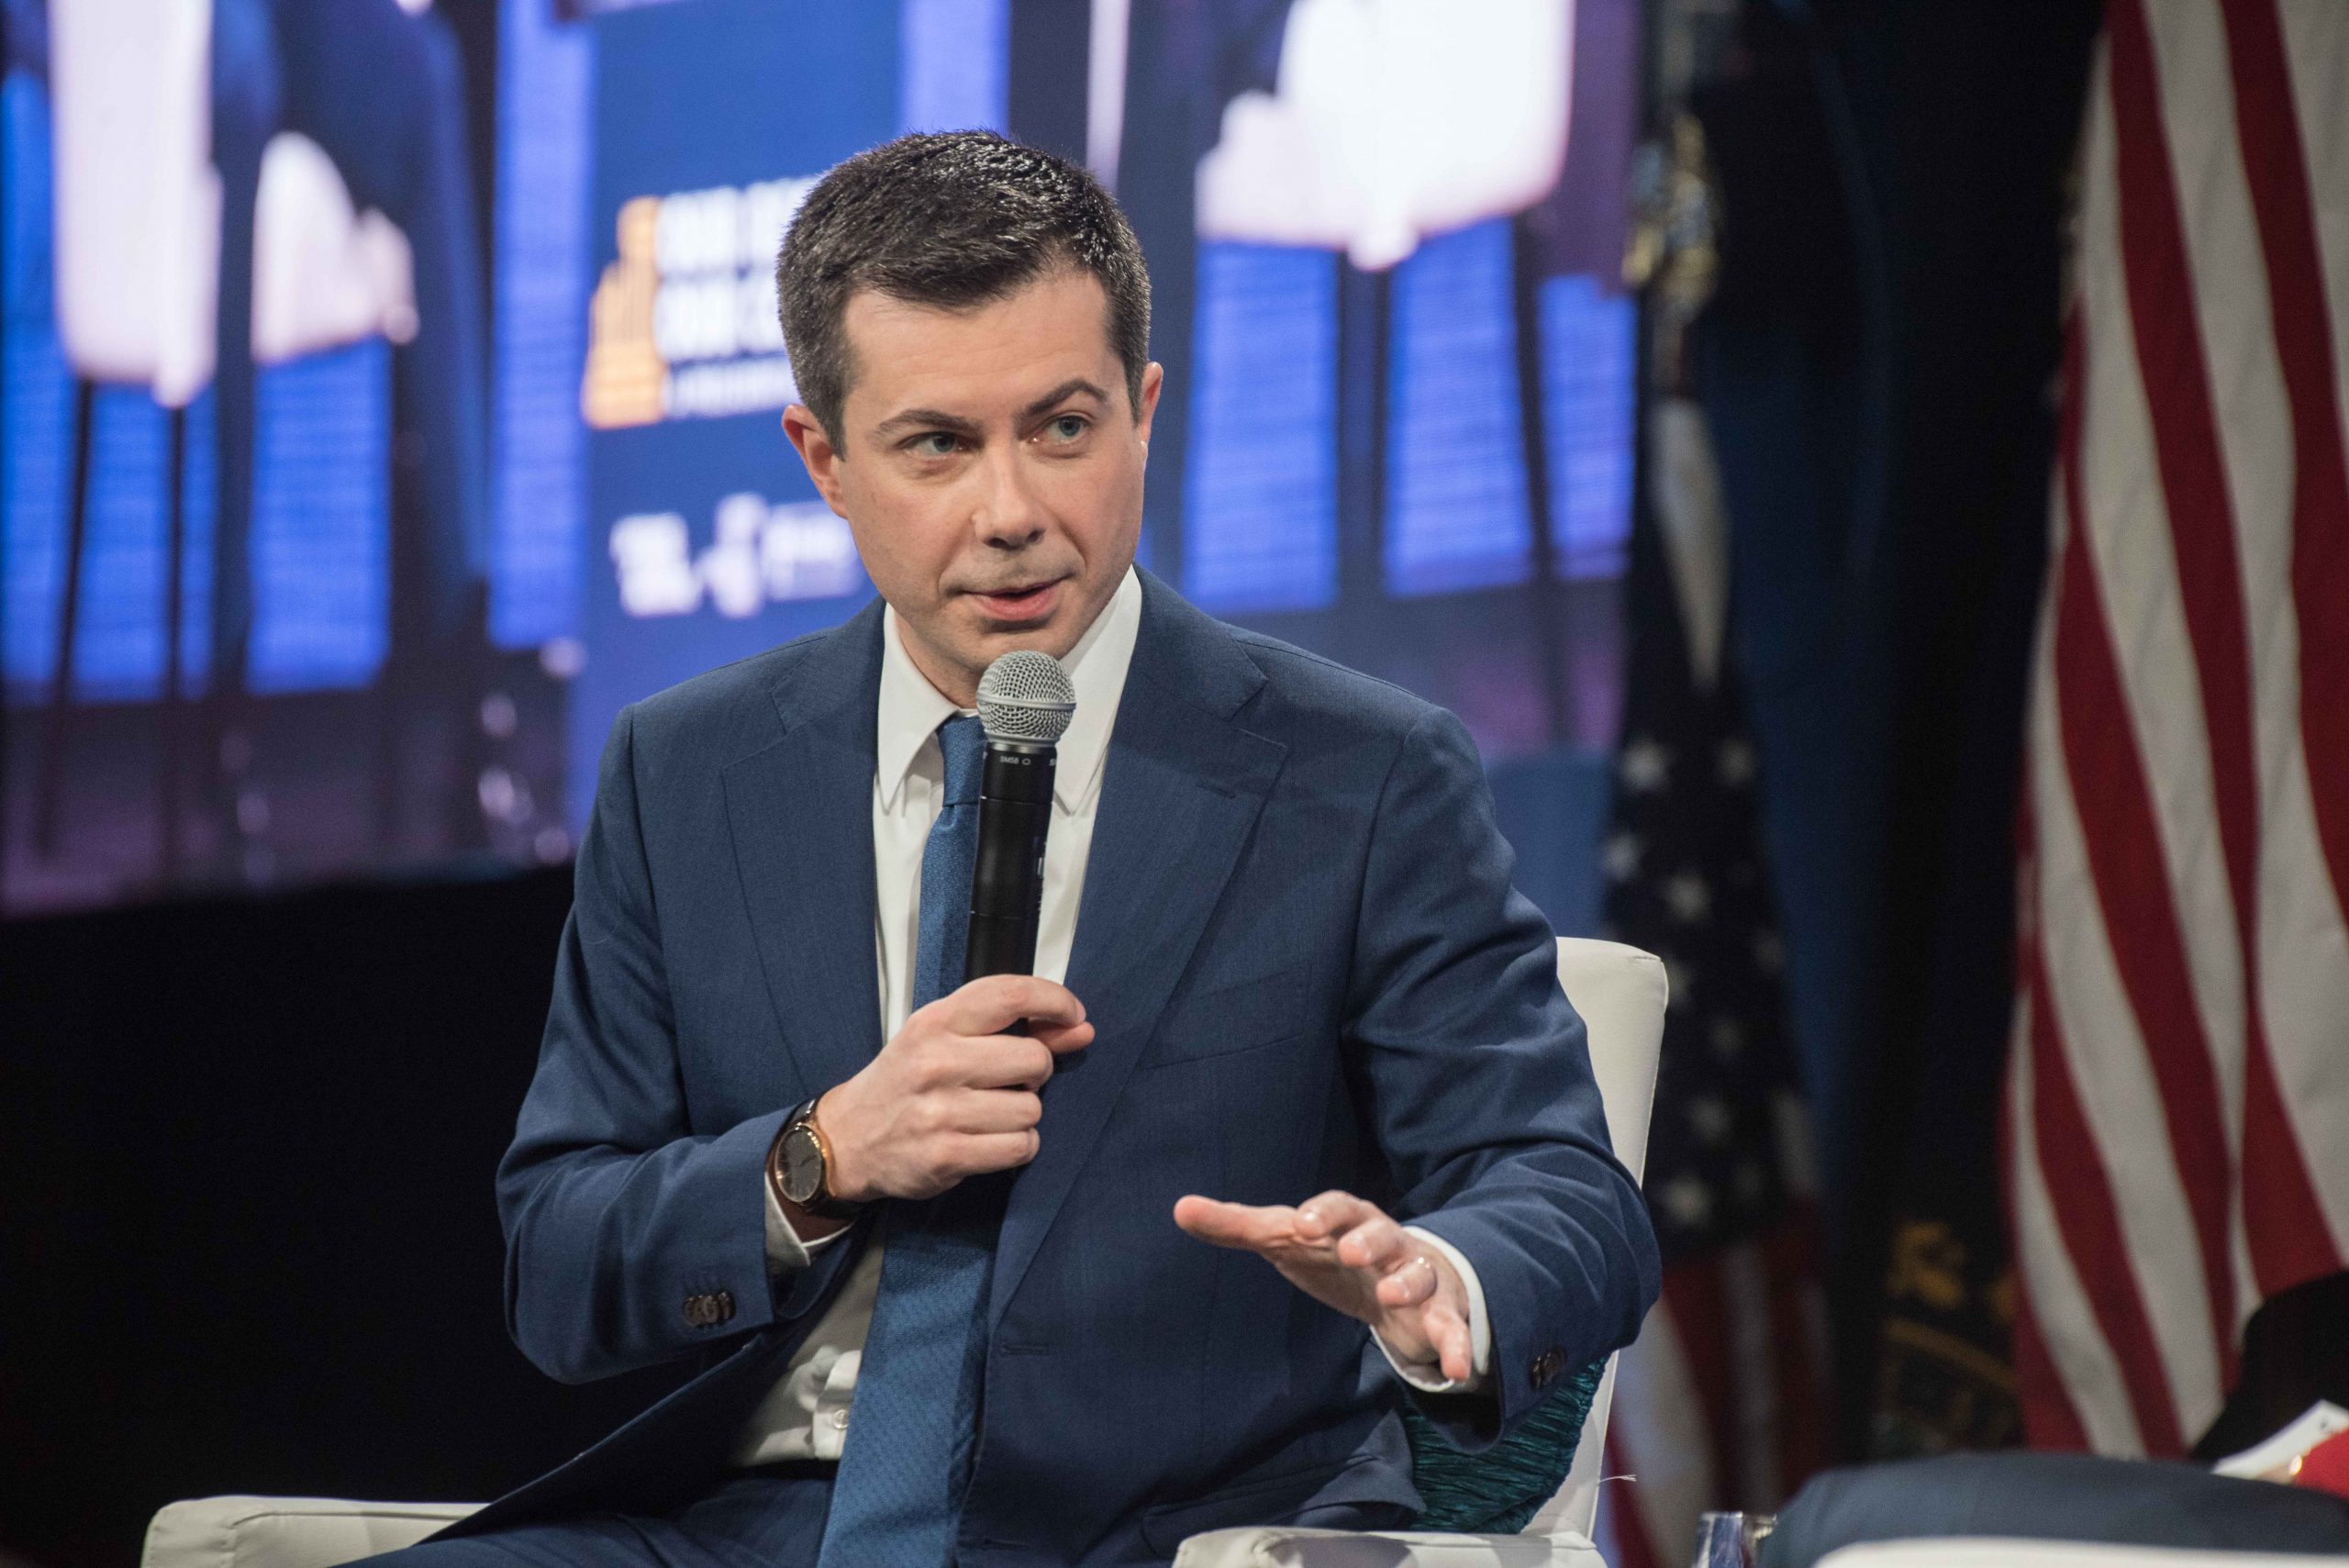 AS CLASS DIVIDES BUTTIGIEG AND SANDERS SUPPORTERS, PETE LOOKS FOR SUBURBAN VOTERS